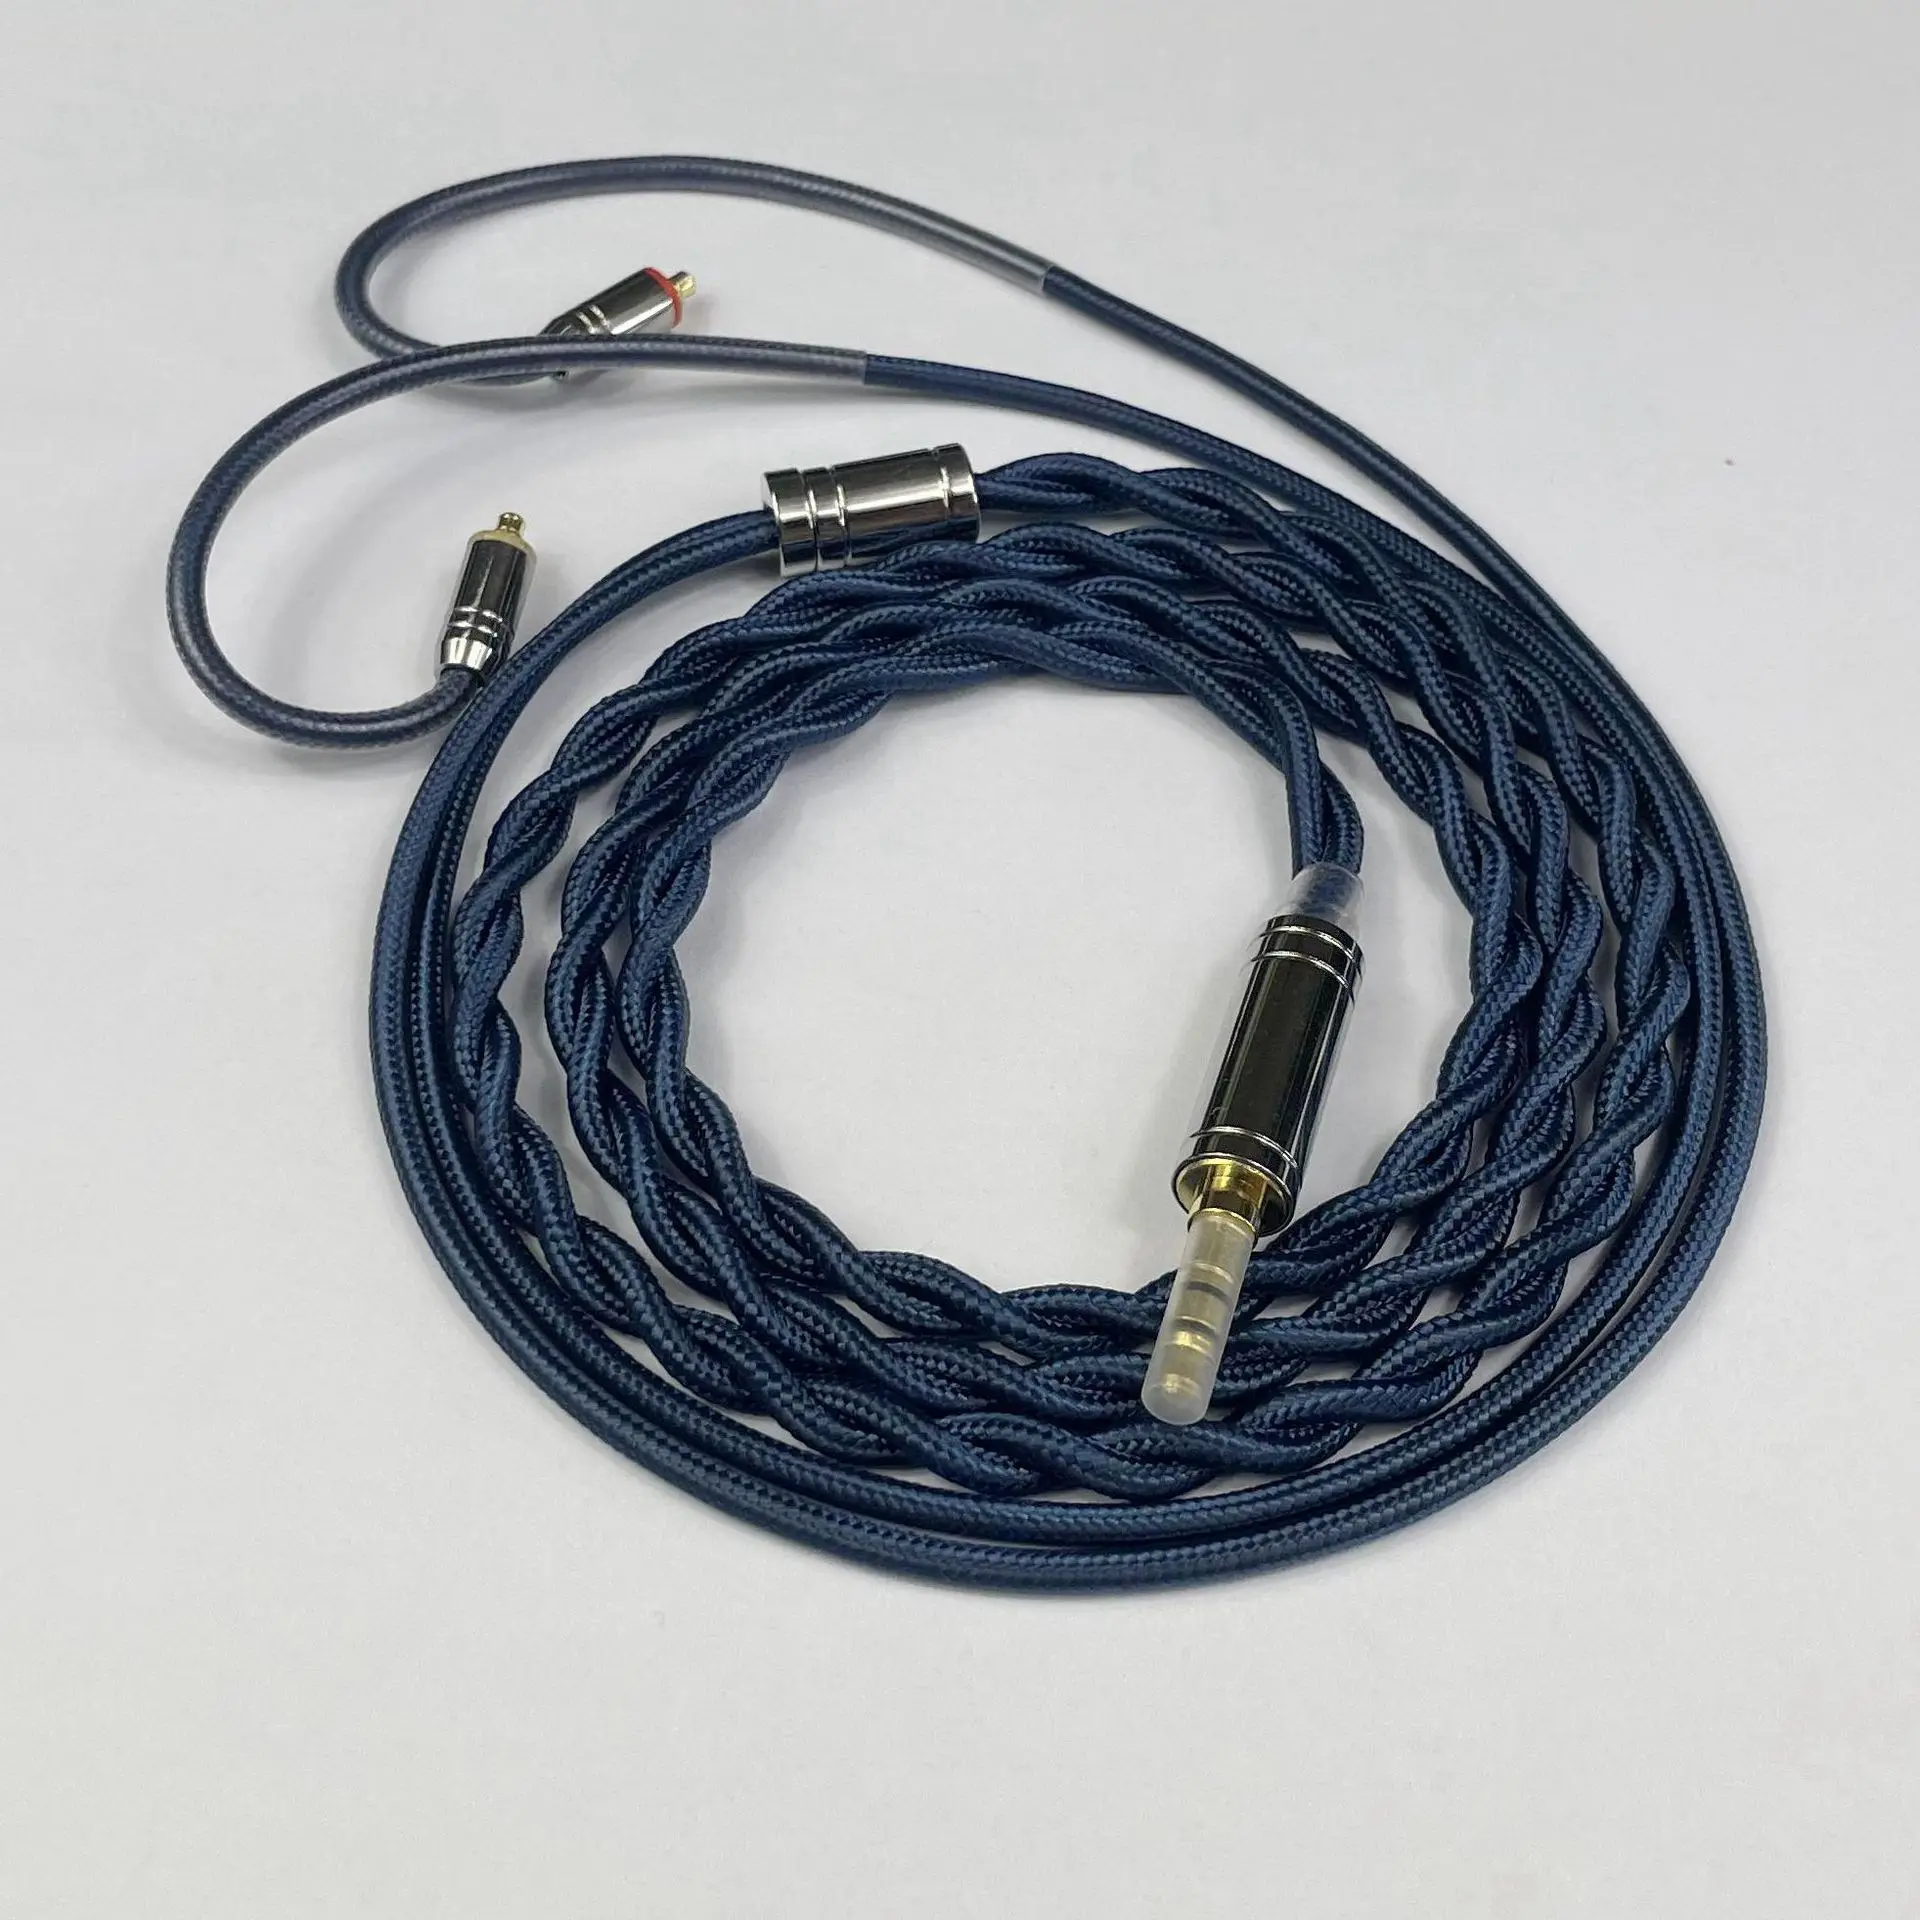 

97 2 cores Silver Plated OCC Handmade Headphone Replacement Cable For HD580 HD650 HD800 HIFIMAN ANANDA Blue iem cable